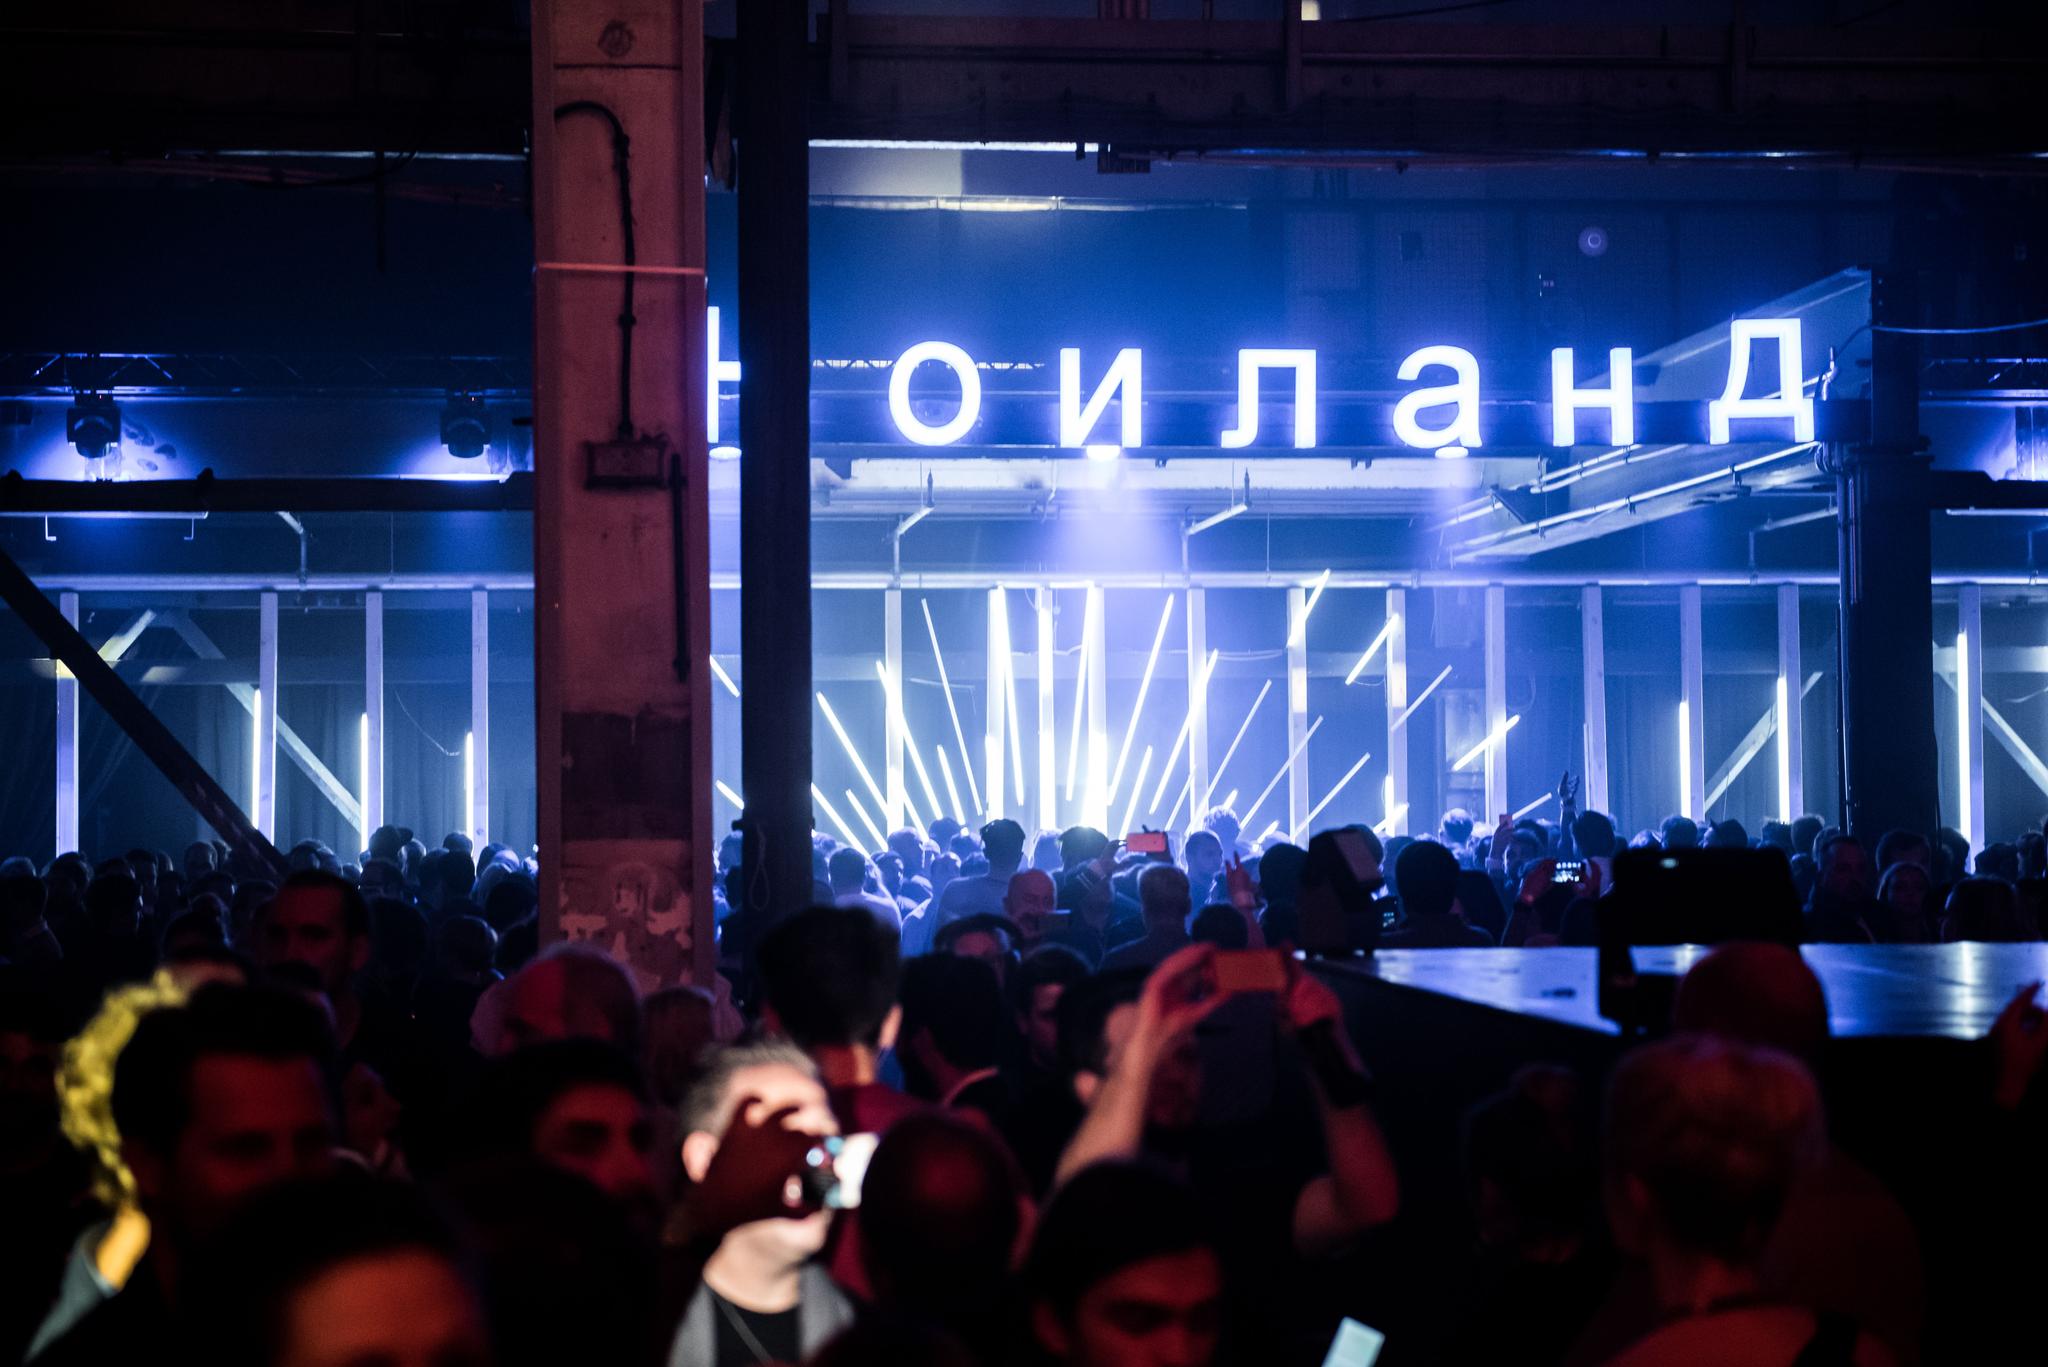 A full dancefloor with bright Cyrillic writing and LEDs.